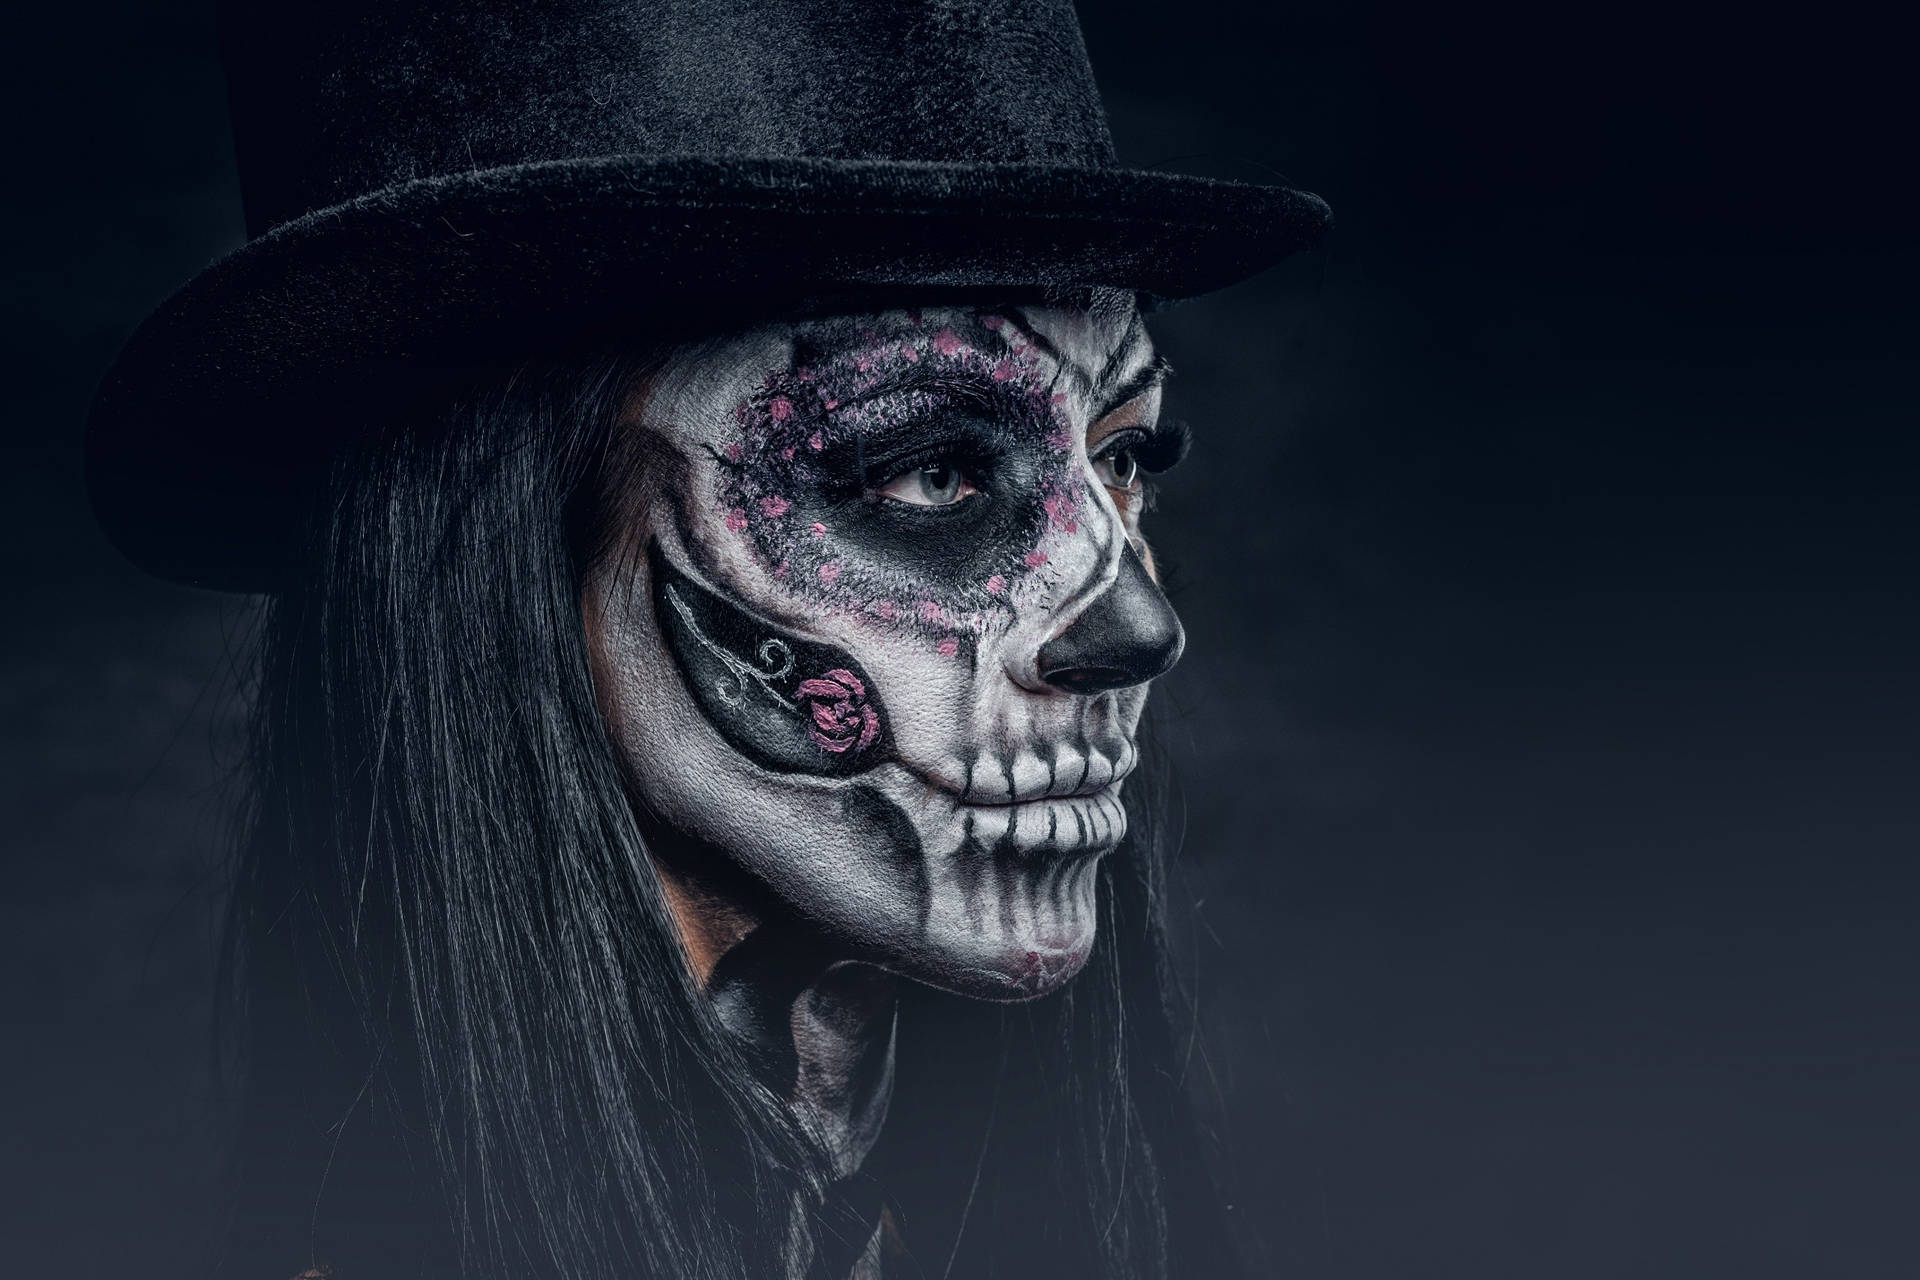 A Mysterious Sugar Skull Person in a Tophat Wallpaper